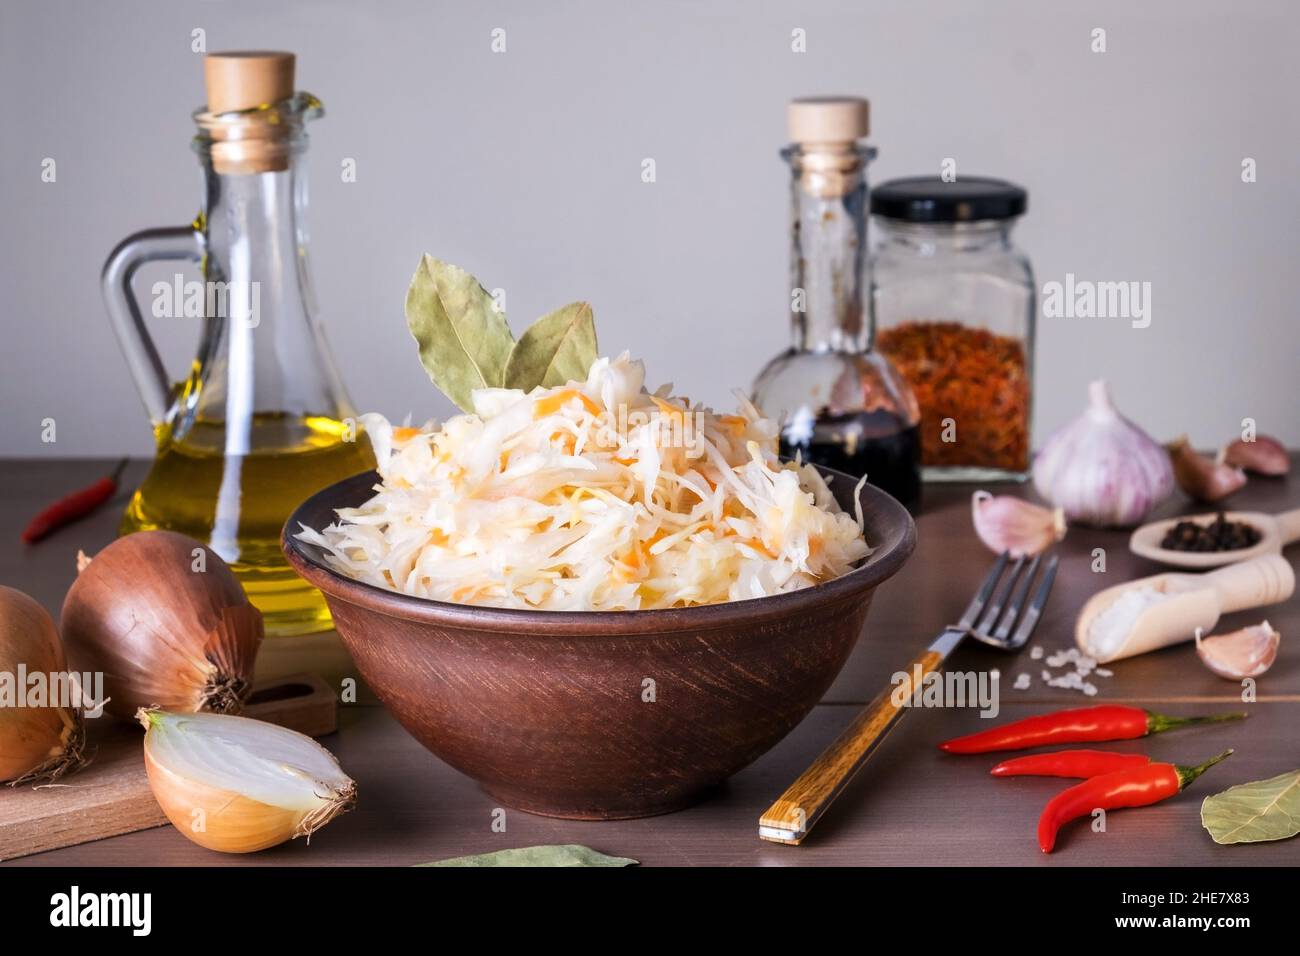 Close-up of sauerkraut fermented cabbage in ceramic sauerkraut bowl on table with spices and ingredients. Healthy healthy food. Russian kitchen. Selec Stock Photo